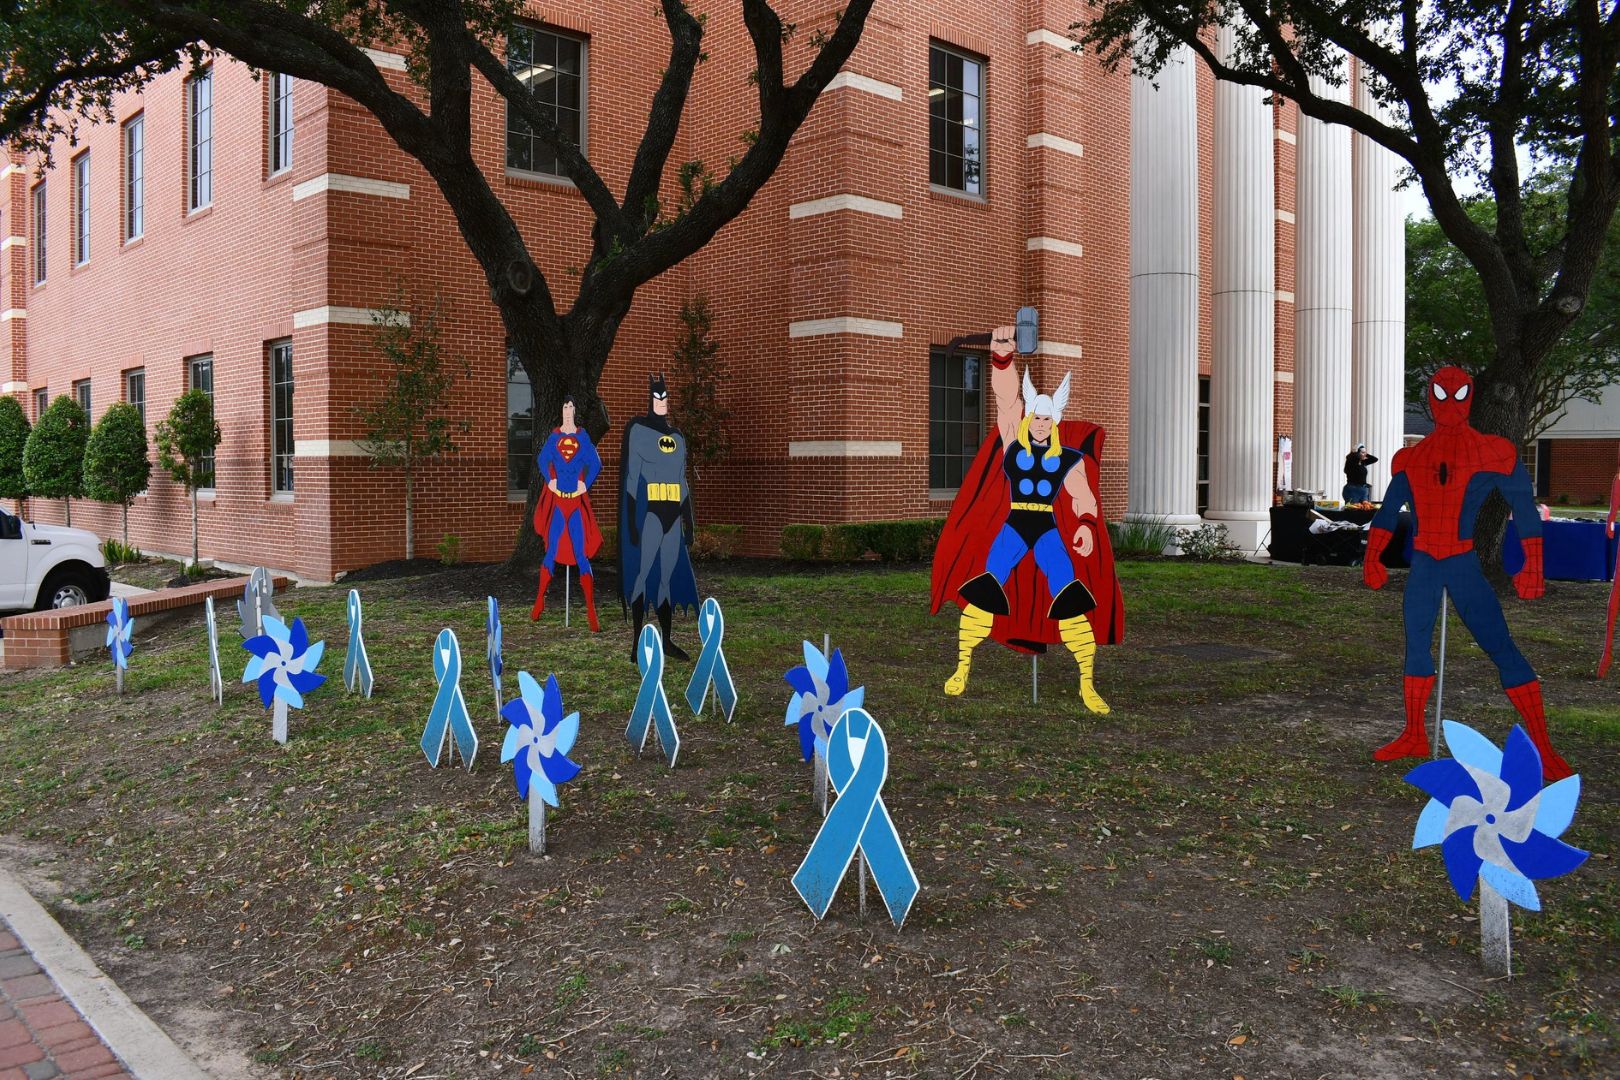 Katy Rallies for Change: The 3rd Annual Superheroes Event Takes a Stand Against Child Abuse and Sexual Assault